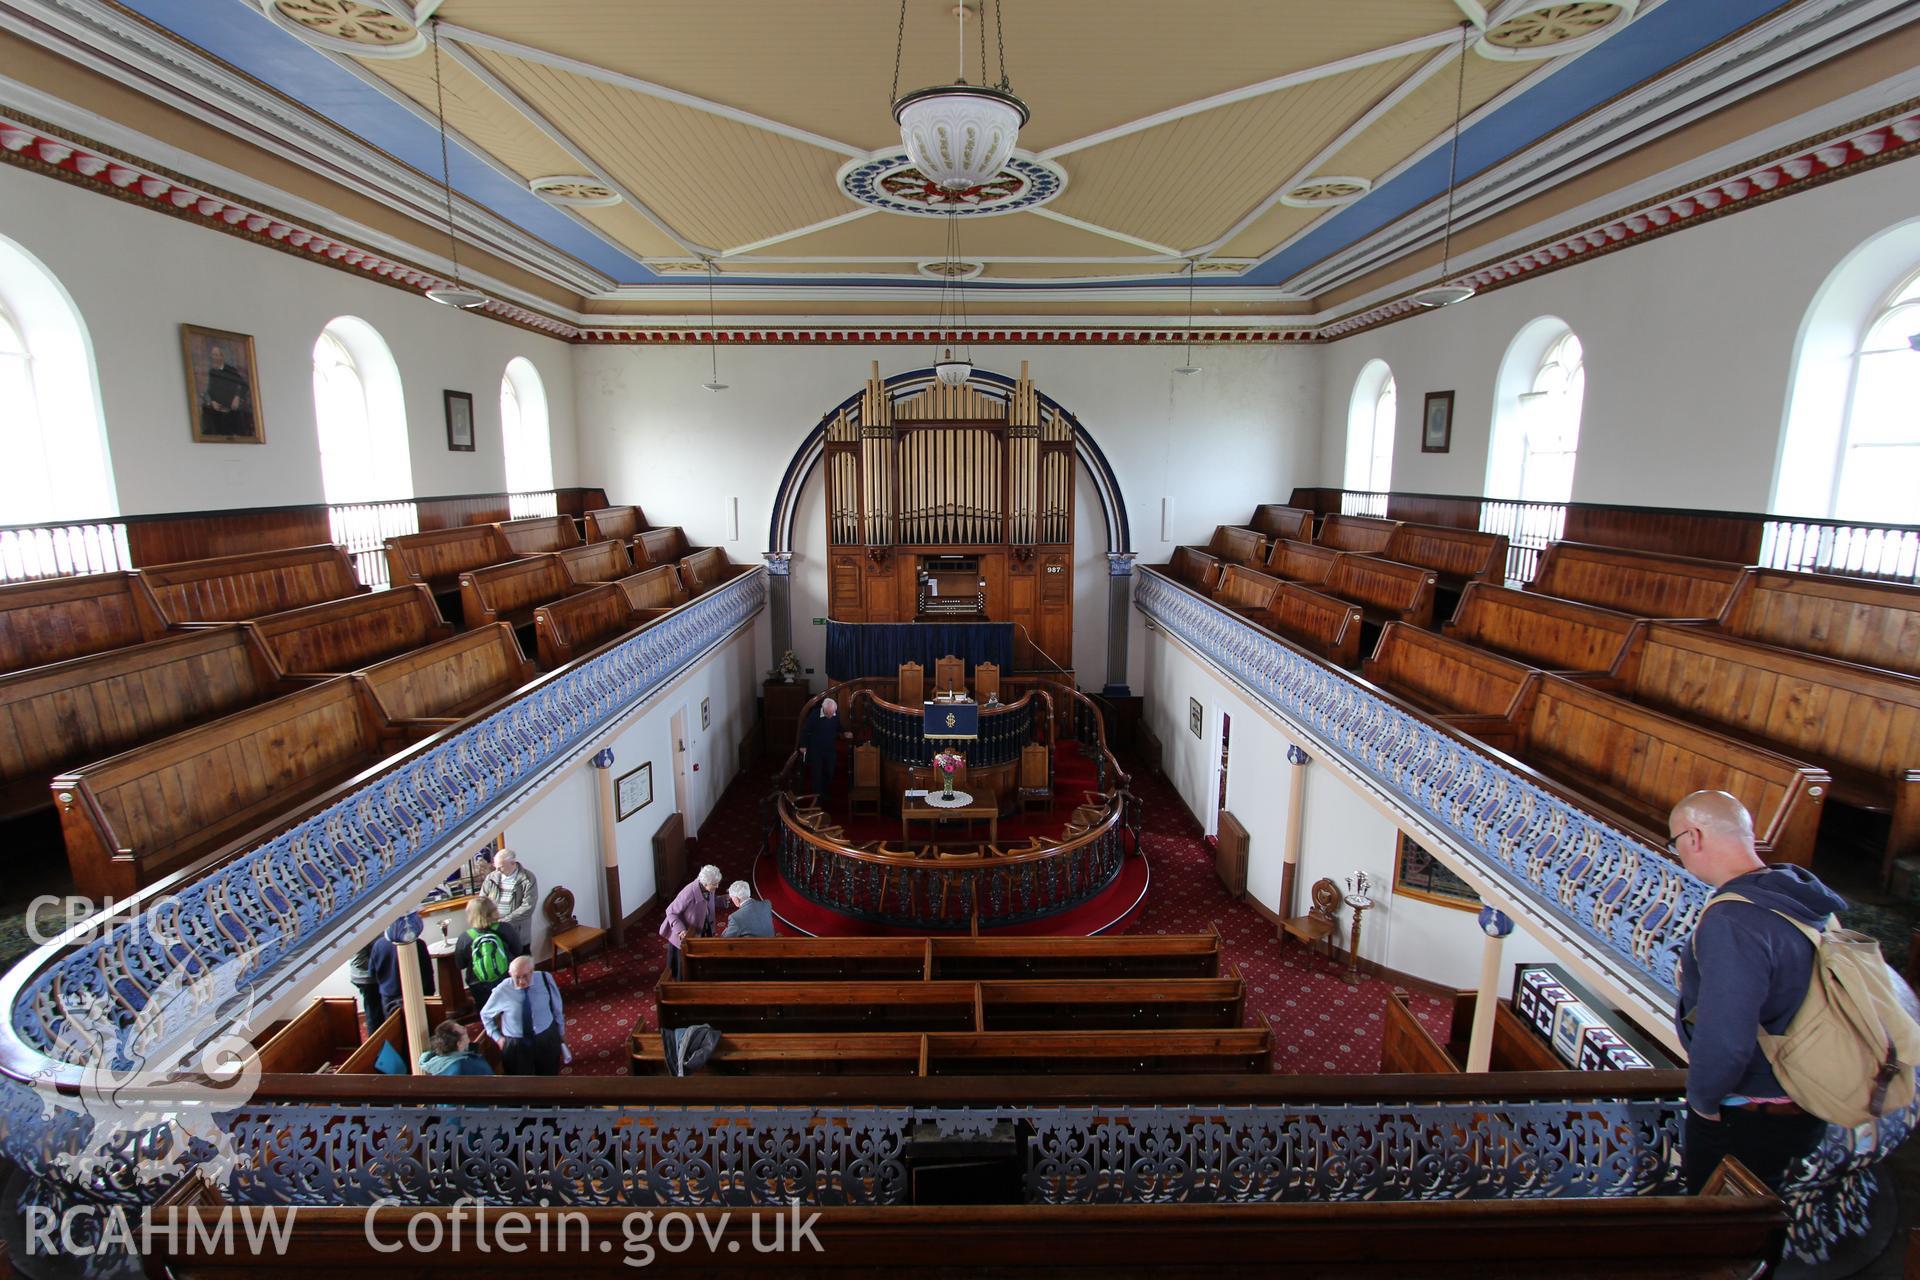 Interior view from first floor balcony showing the pulpit and organ. Photographic survey of Seion Welsh Baptist Chapel, Morriston, conducted by Sue Fielding on 13th May 2017.